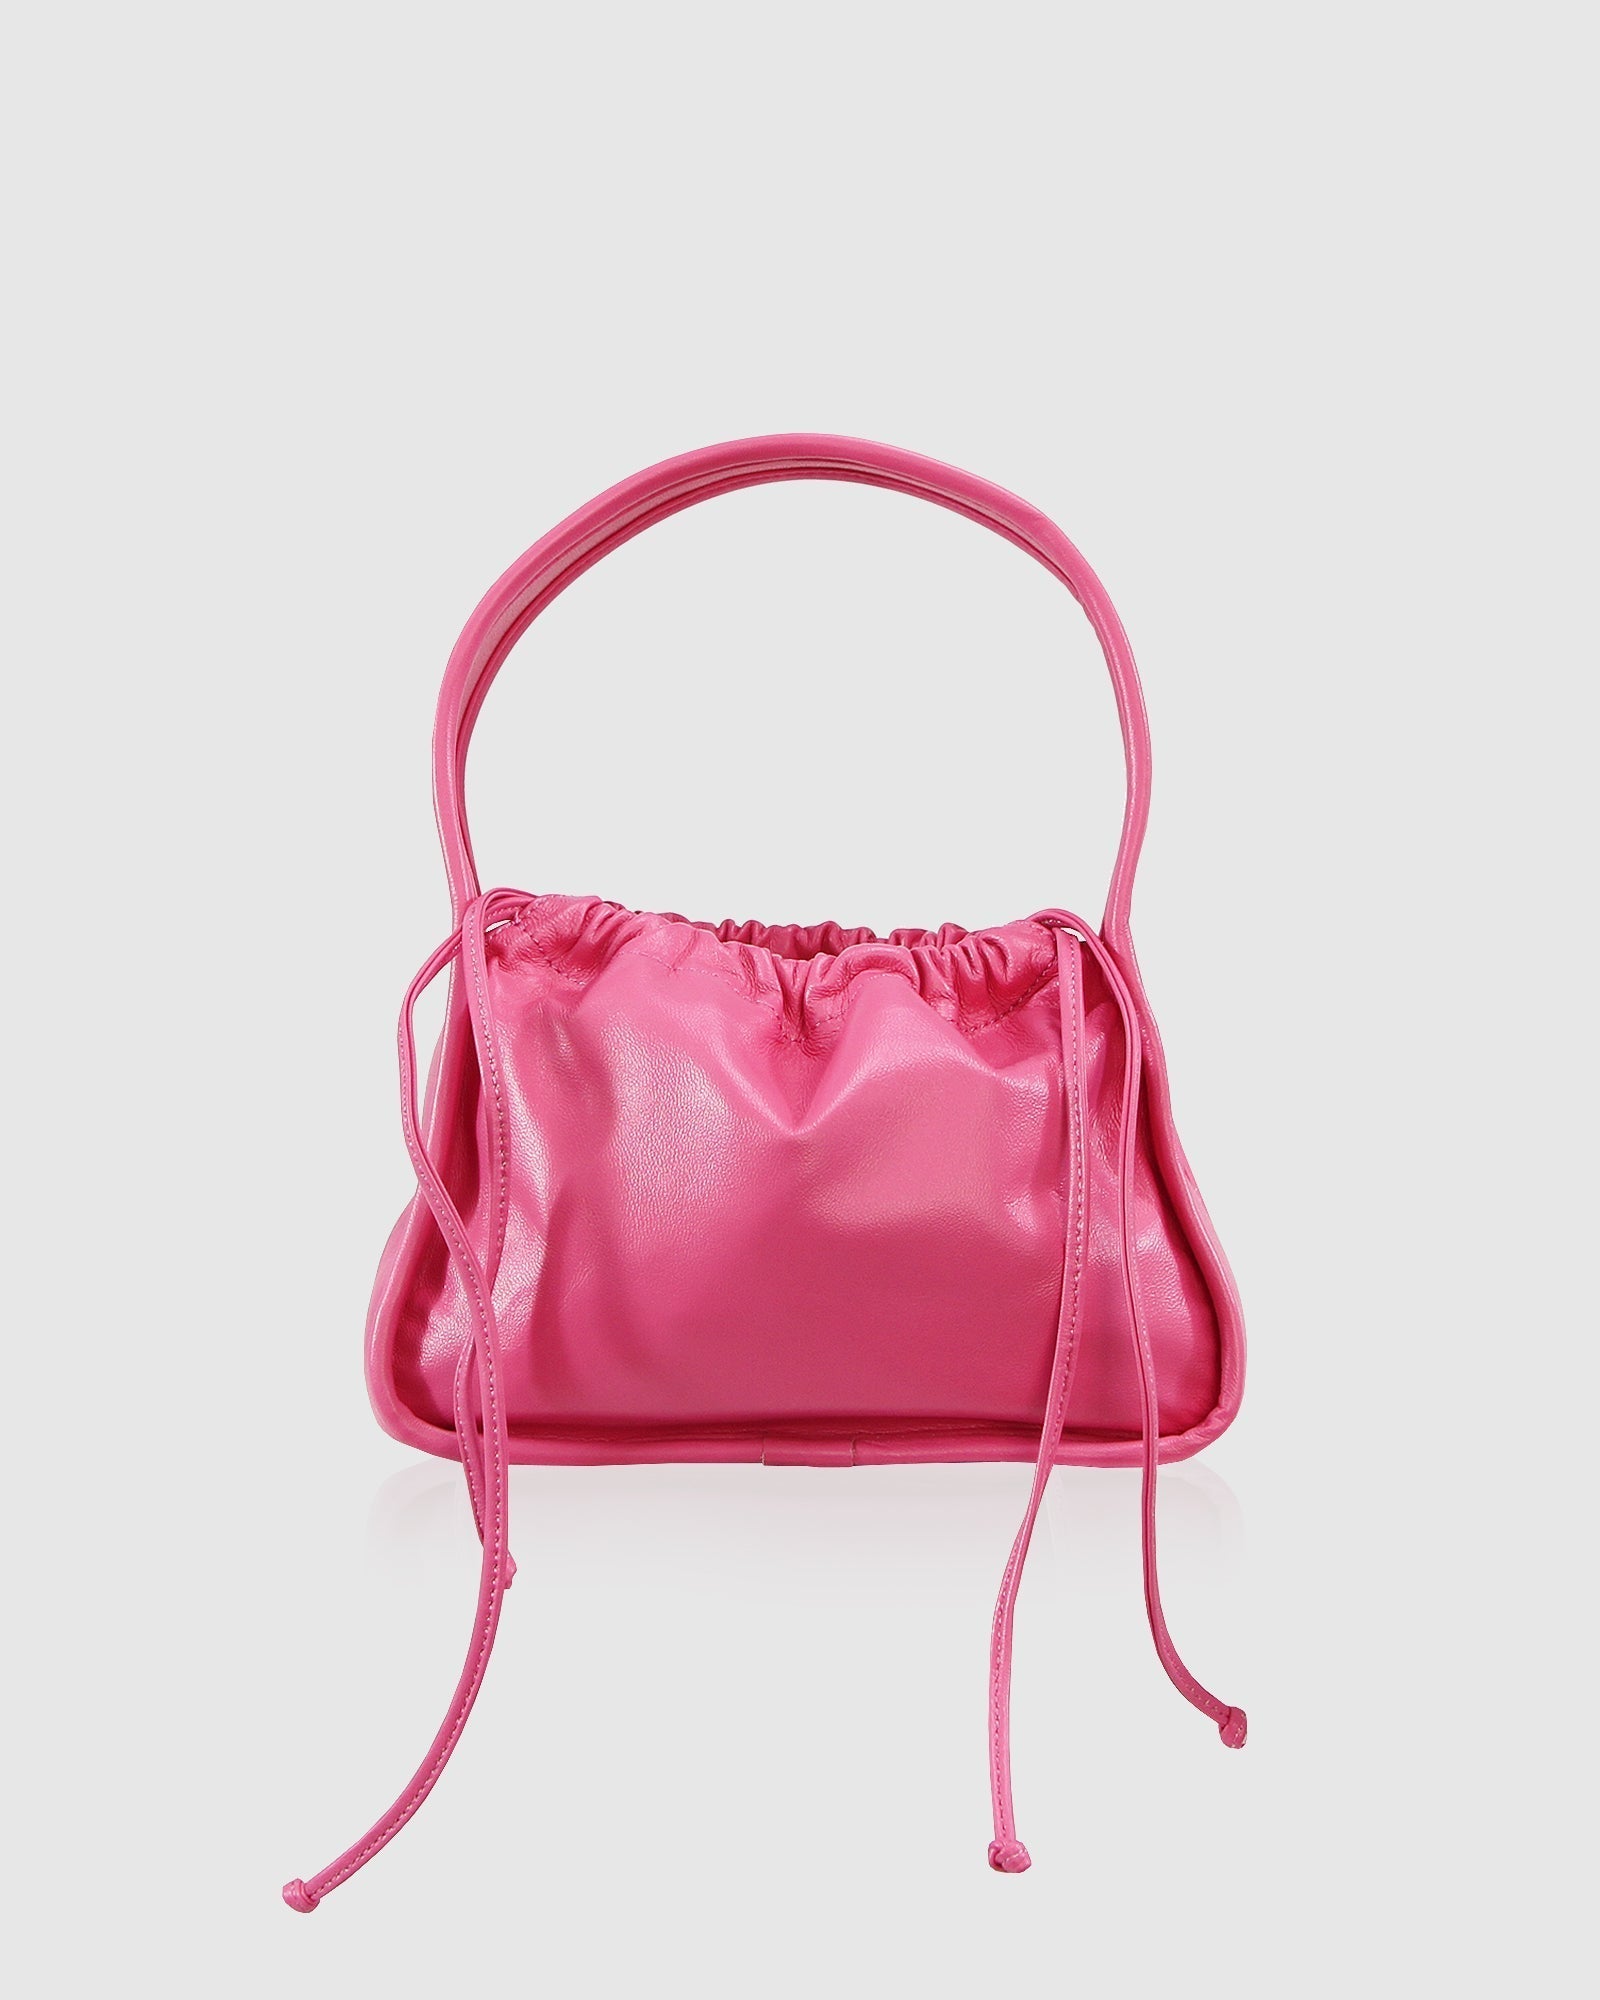 Clutch Cross Body Bag With Strap - Bright Pink - Wild at Heart